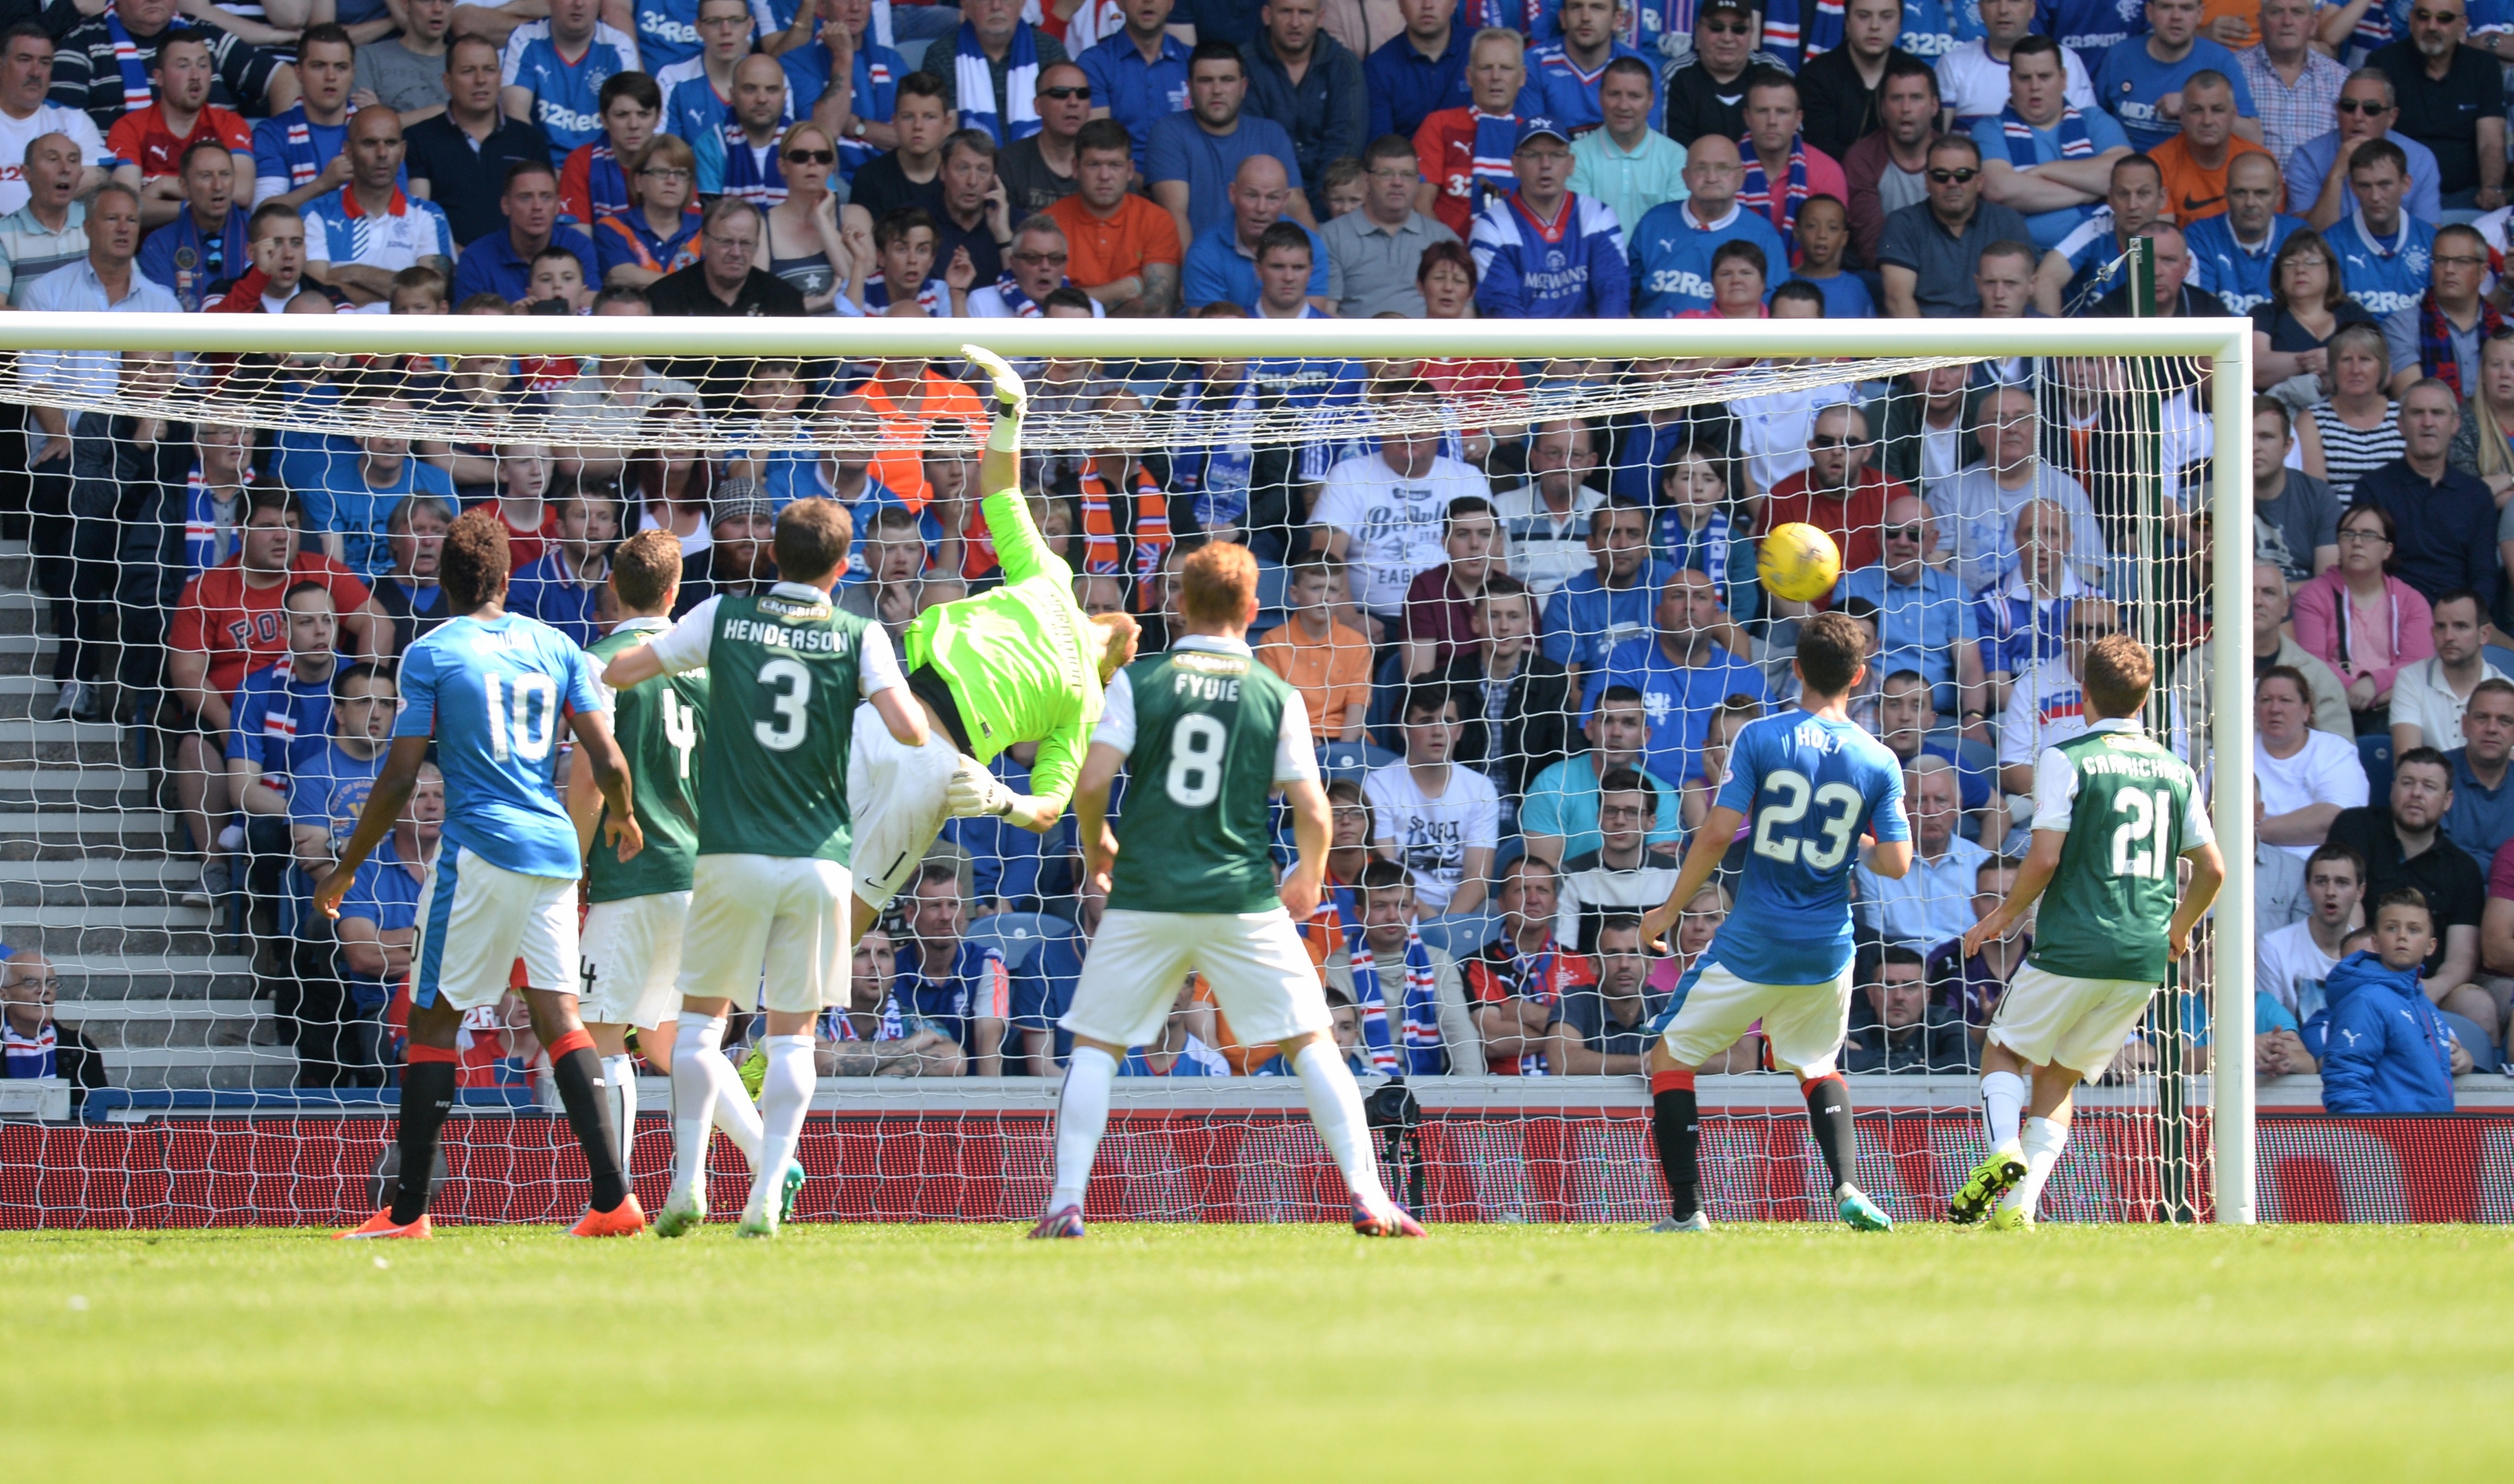 Hibs goalkeeper Mark Oxley is unable to keep out James Tavernier's effort